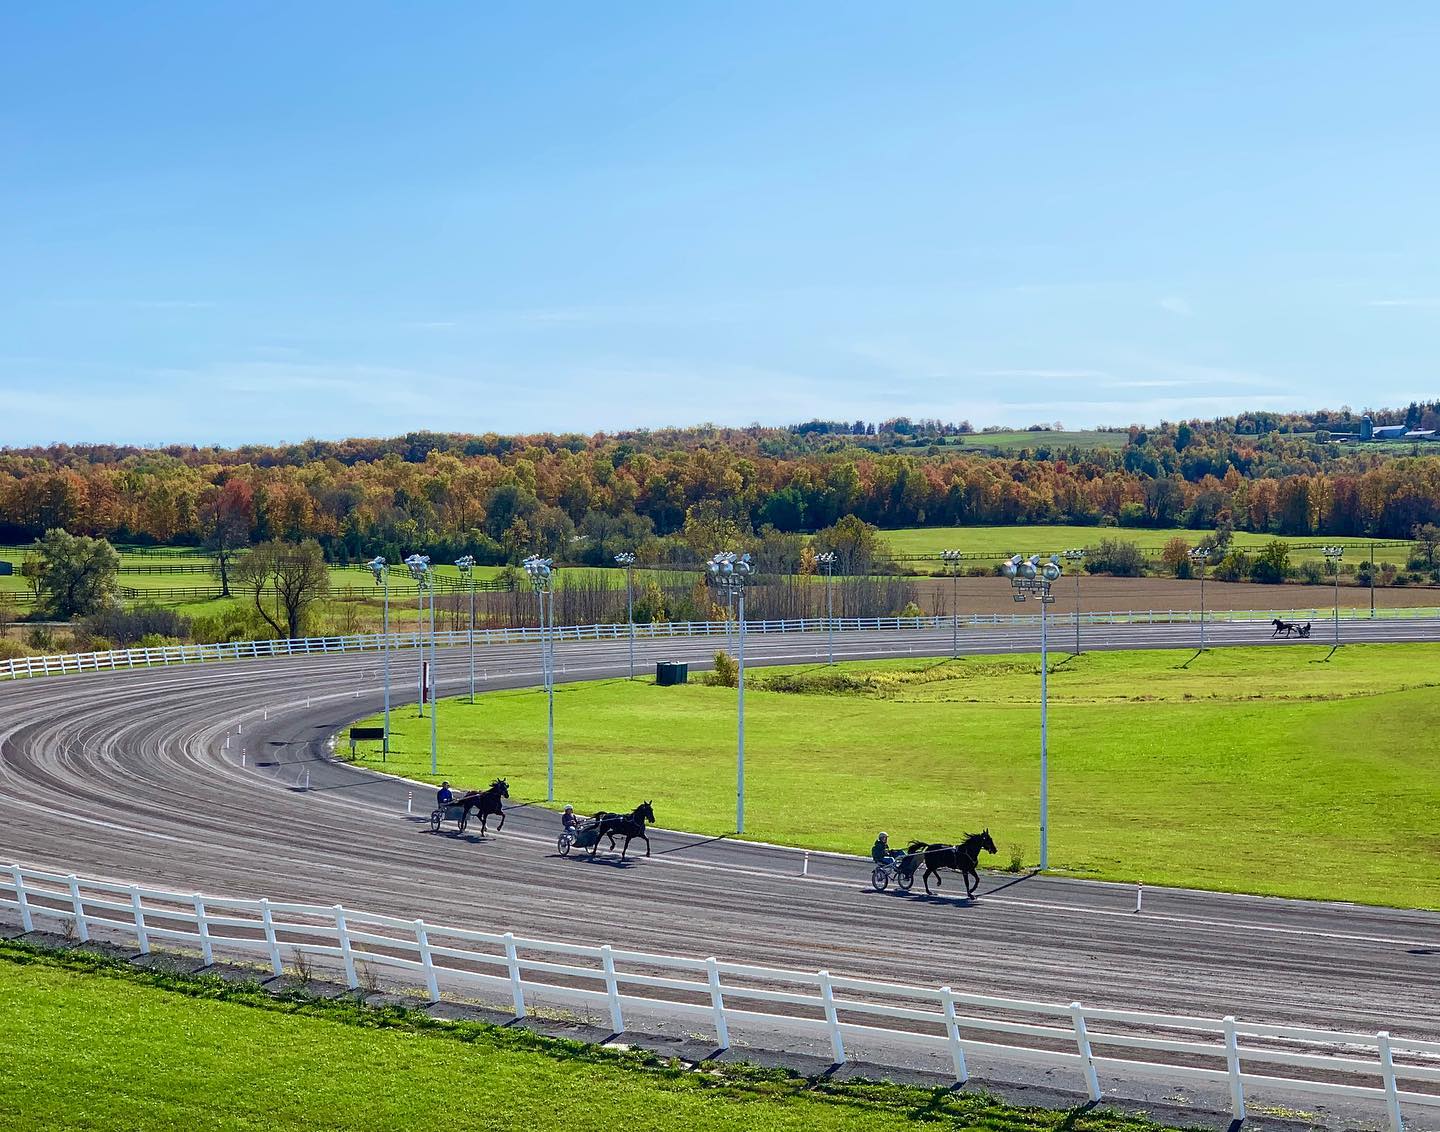 Vernon Downs Celebrates 70 Years of Harness Racing